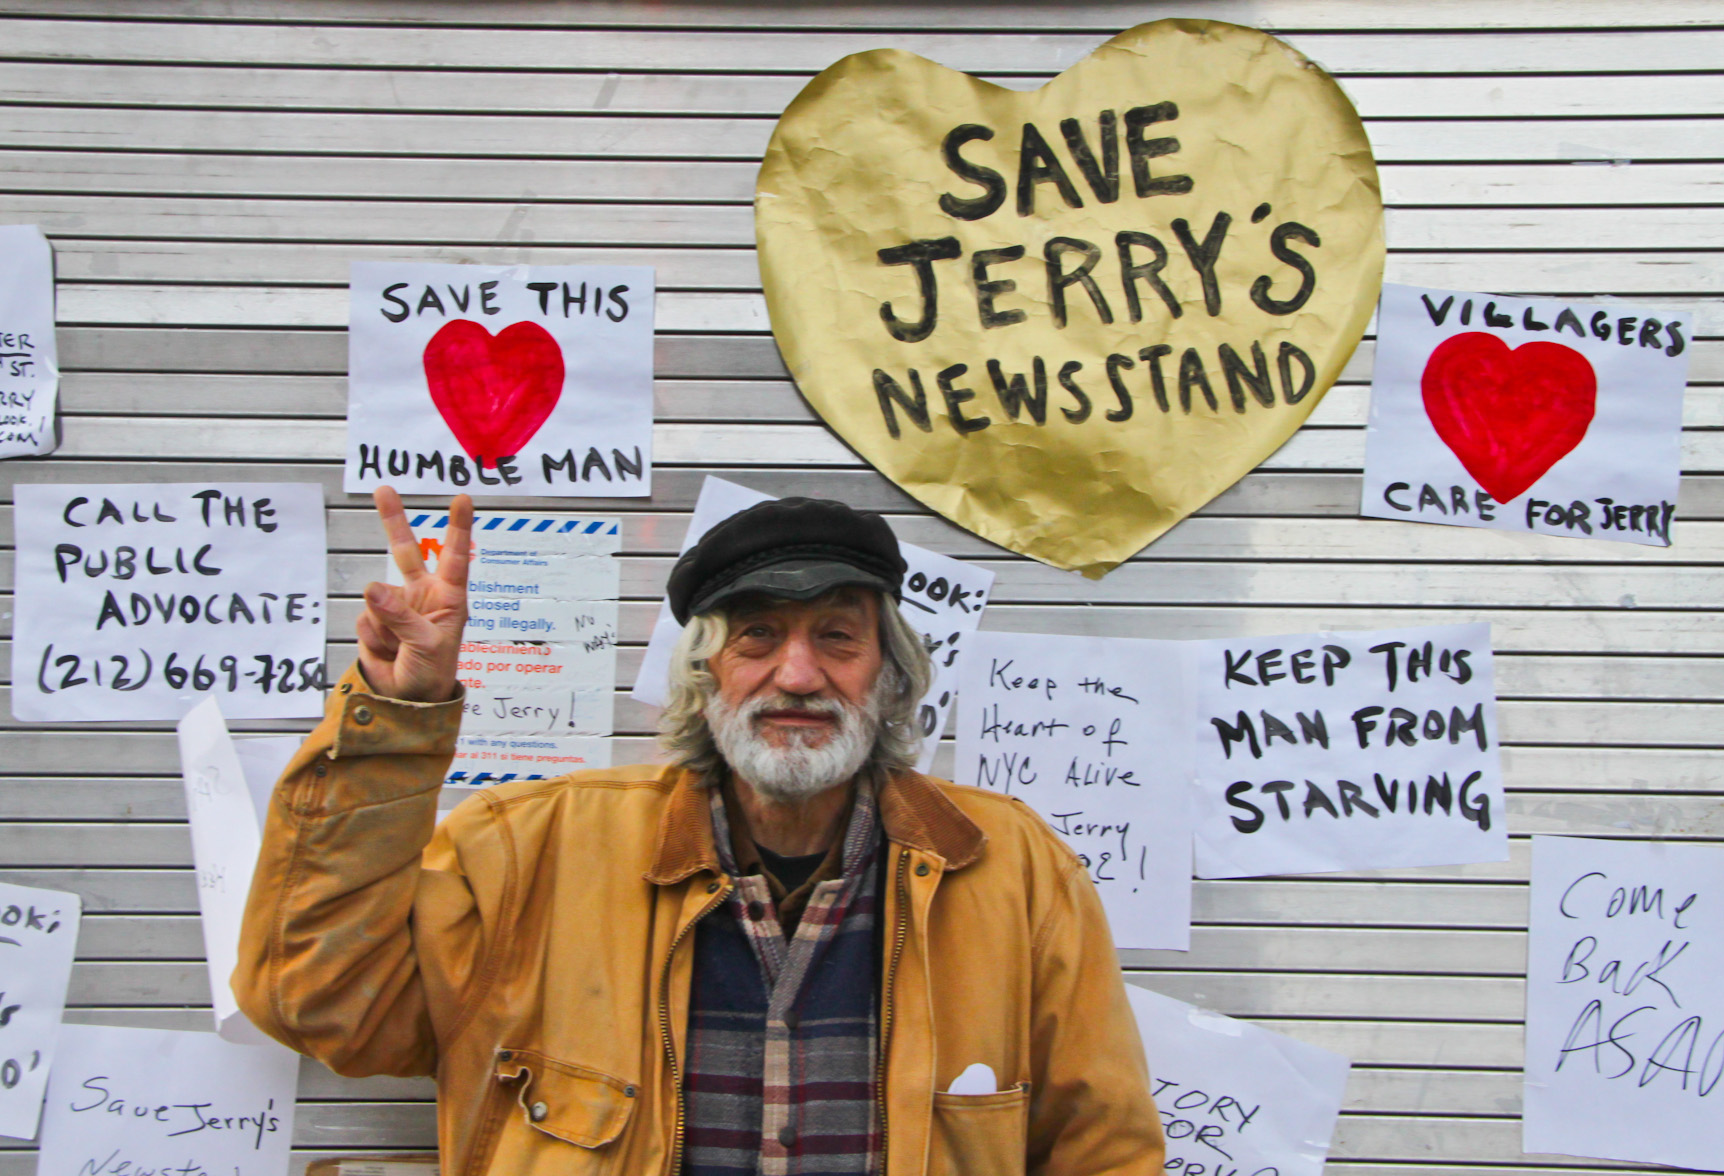 Victory! Jerry Delakas at his Astor Place newsstand at Monday's press conference announcing the news that he reached an agreement with the city allowing him to reopen the stand. Photo by Tequila MInsky